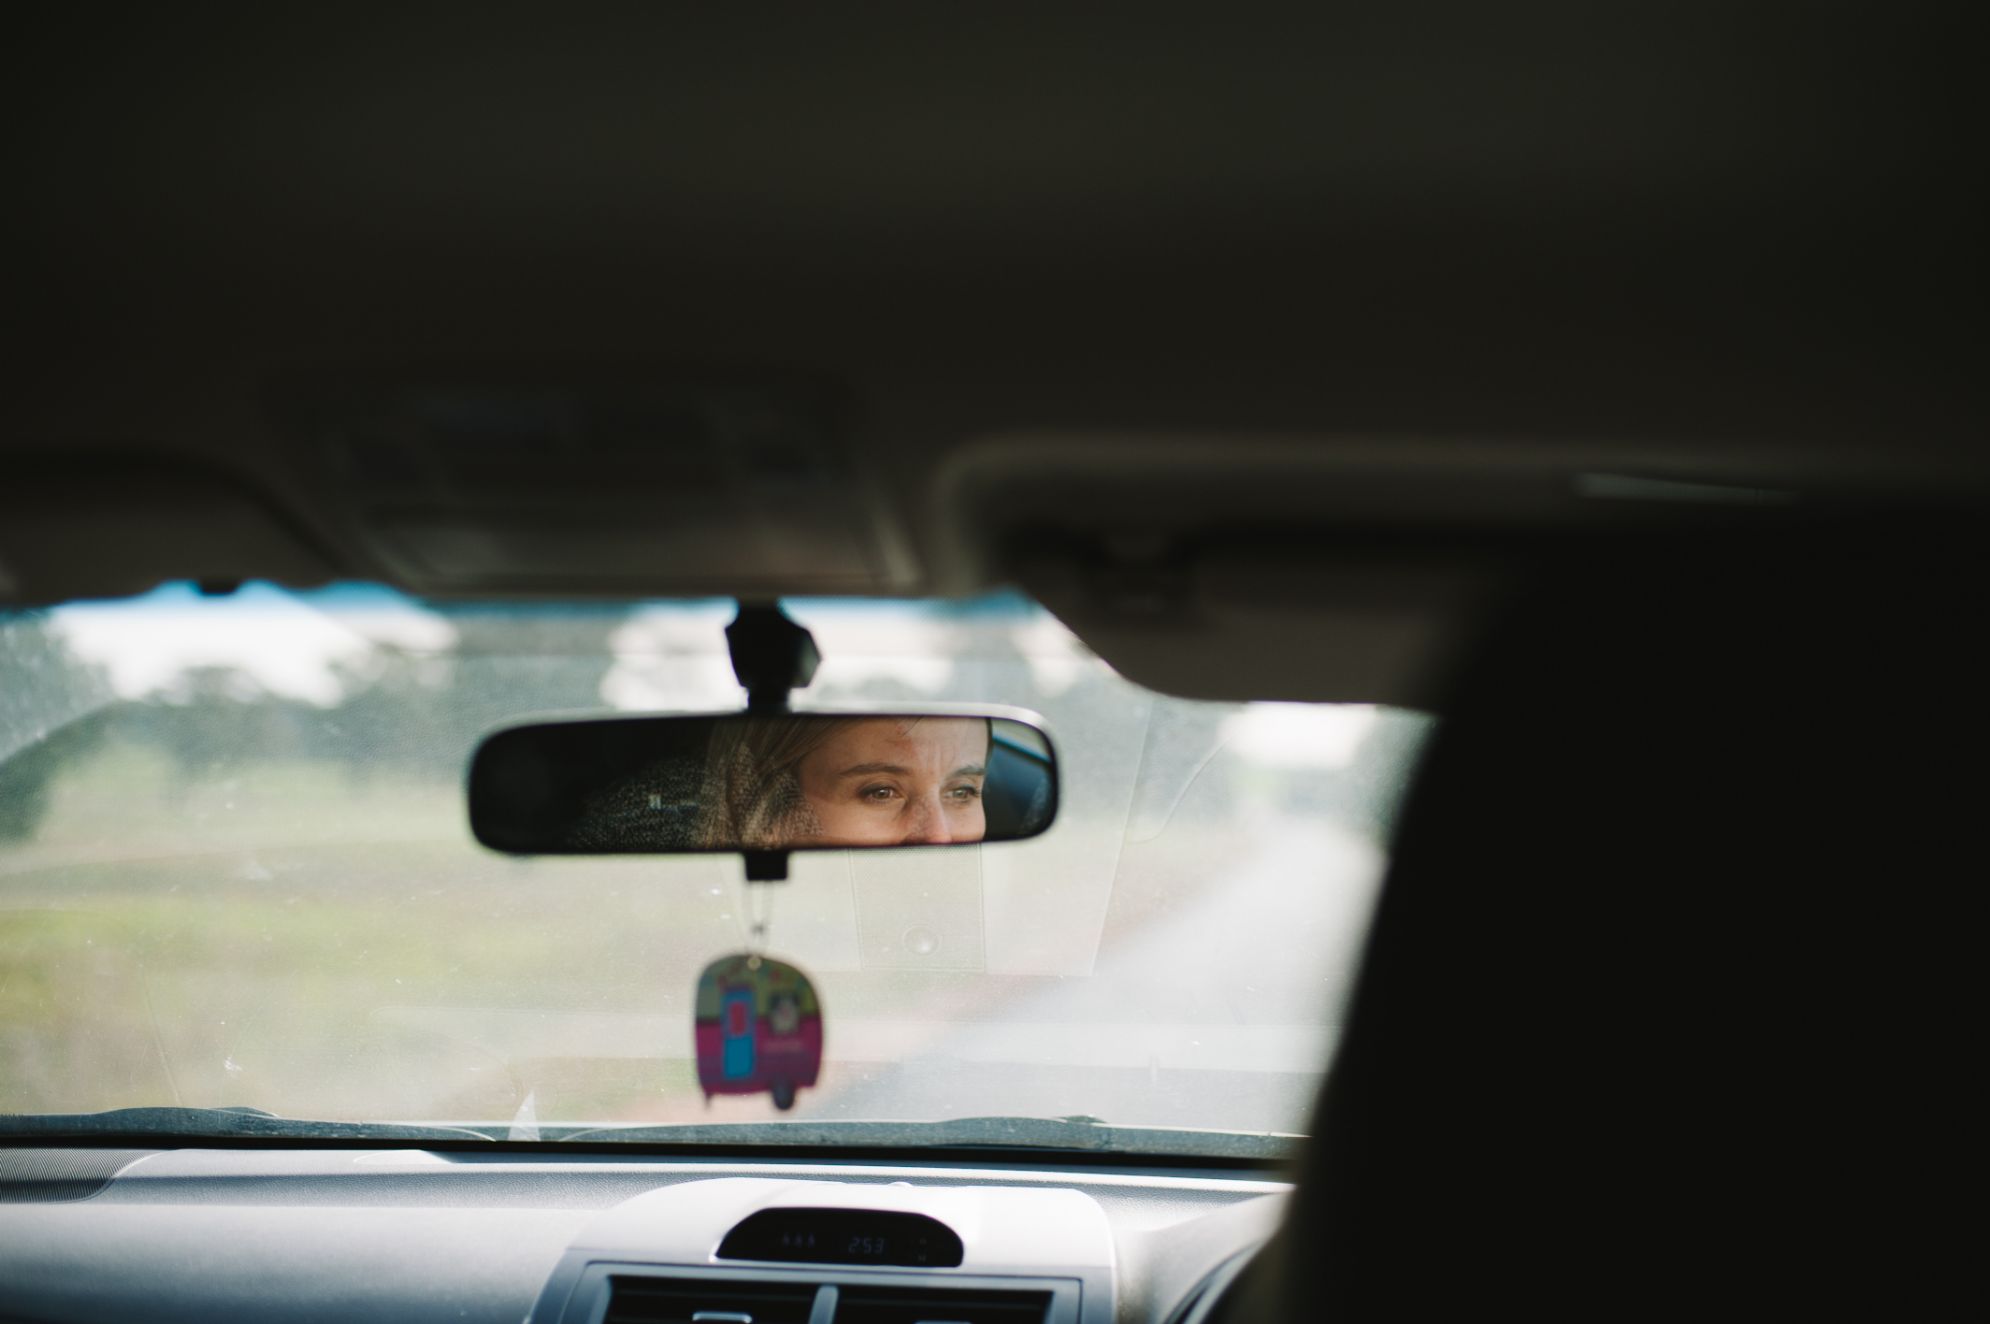 A picture of a female looking through a rear view mirror in a car